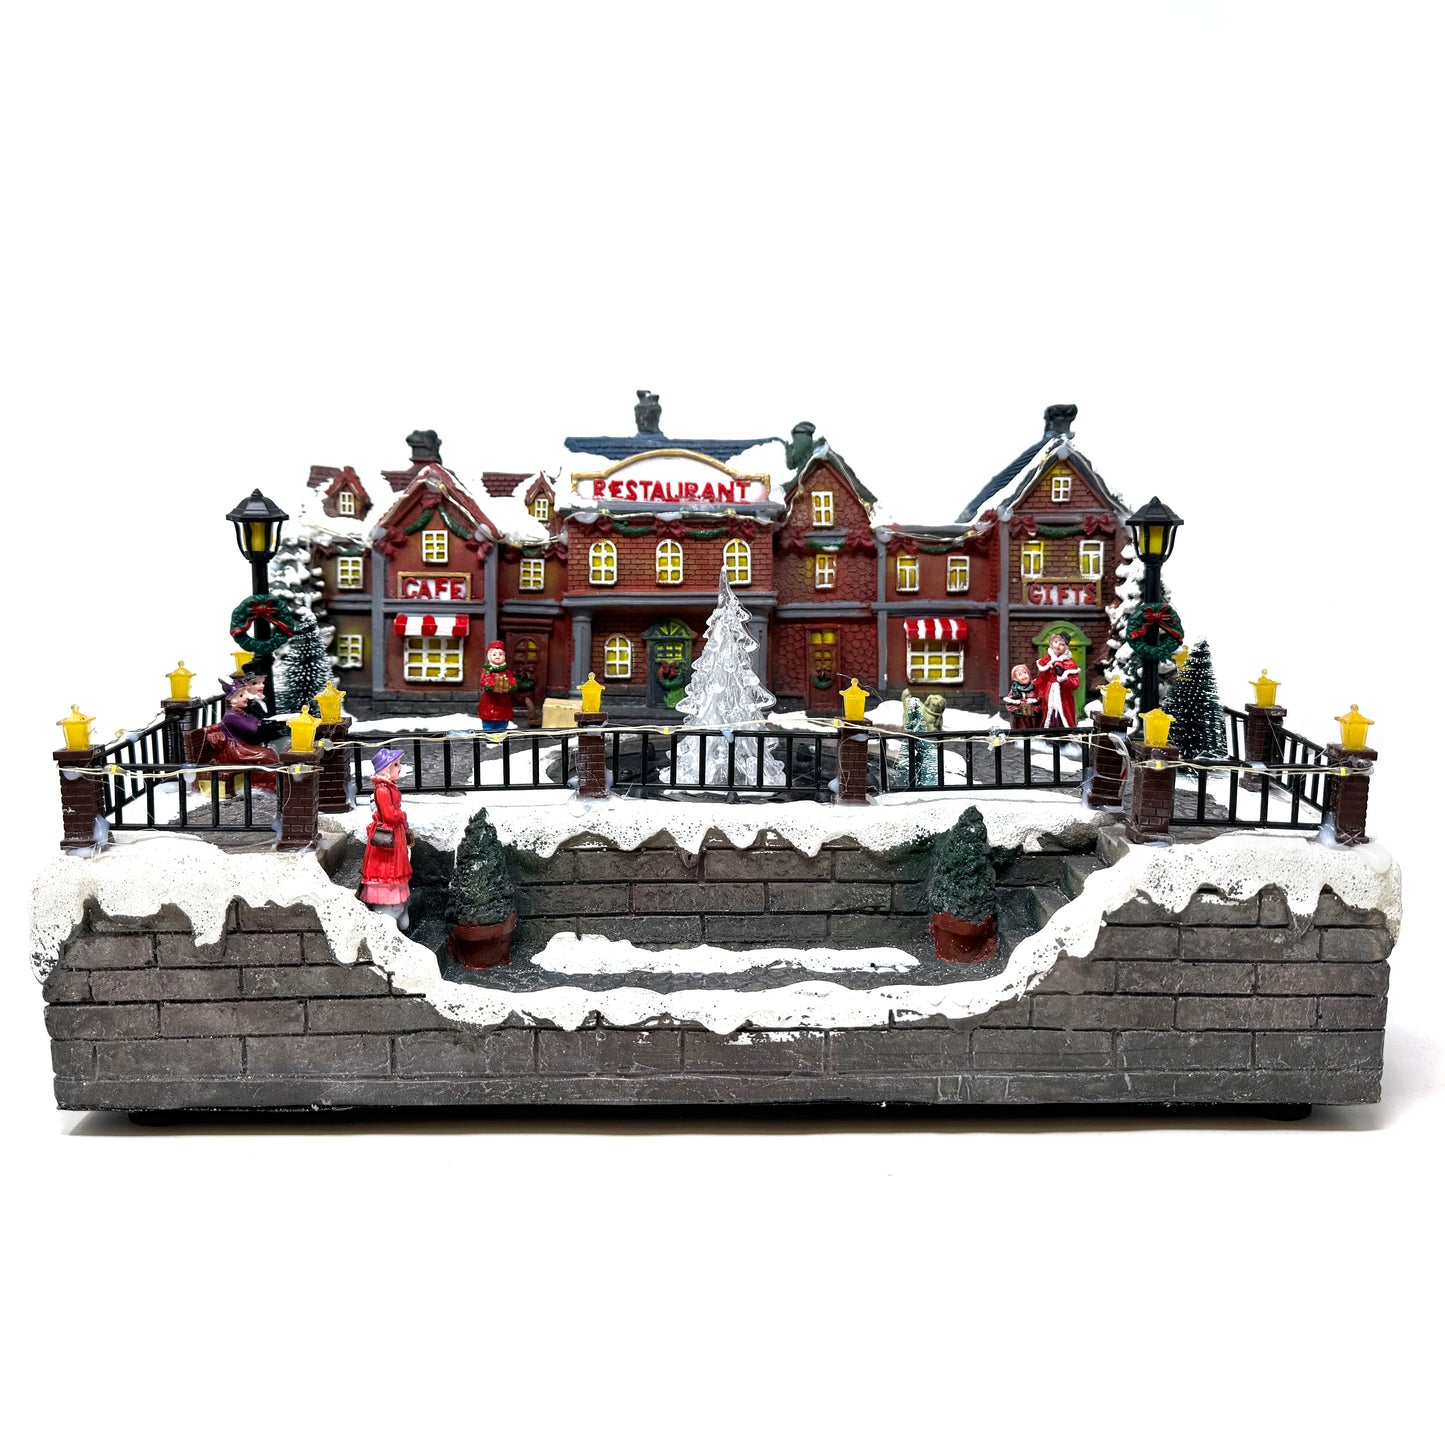 Crafted Polyresin Christmas House Collectable Figurine with USB Cable Power Source-Fountain in Town Center-XH93438